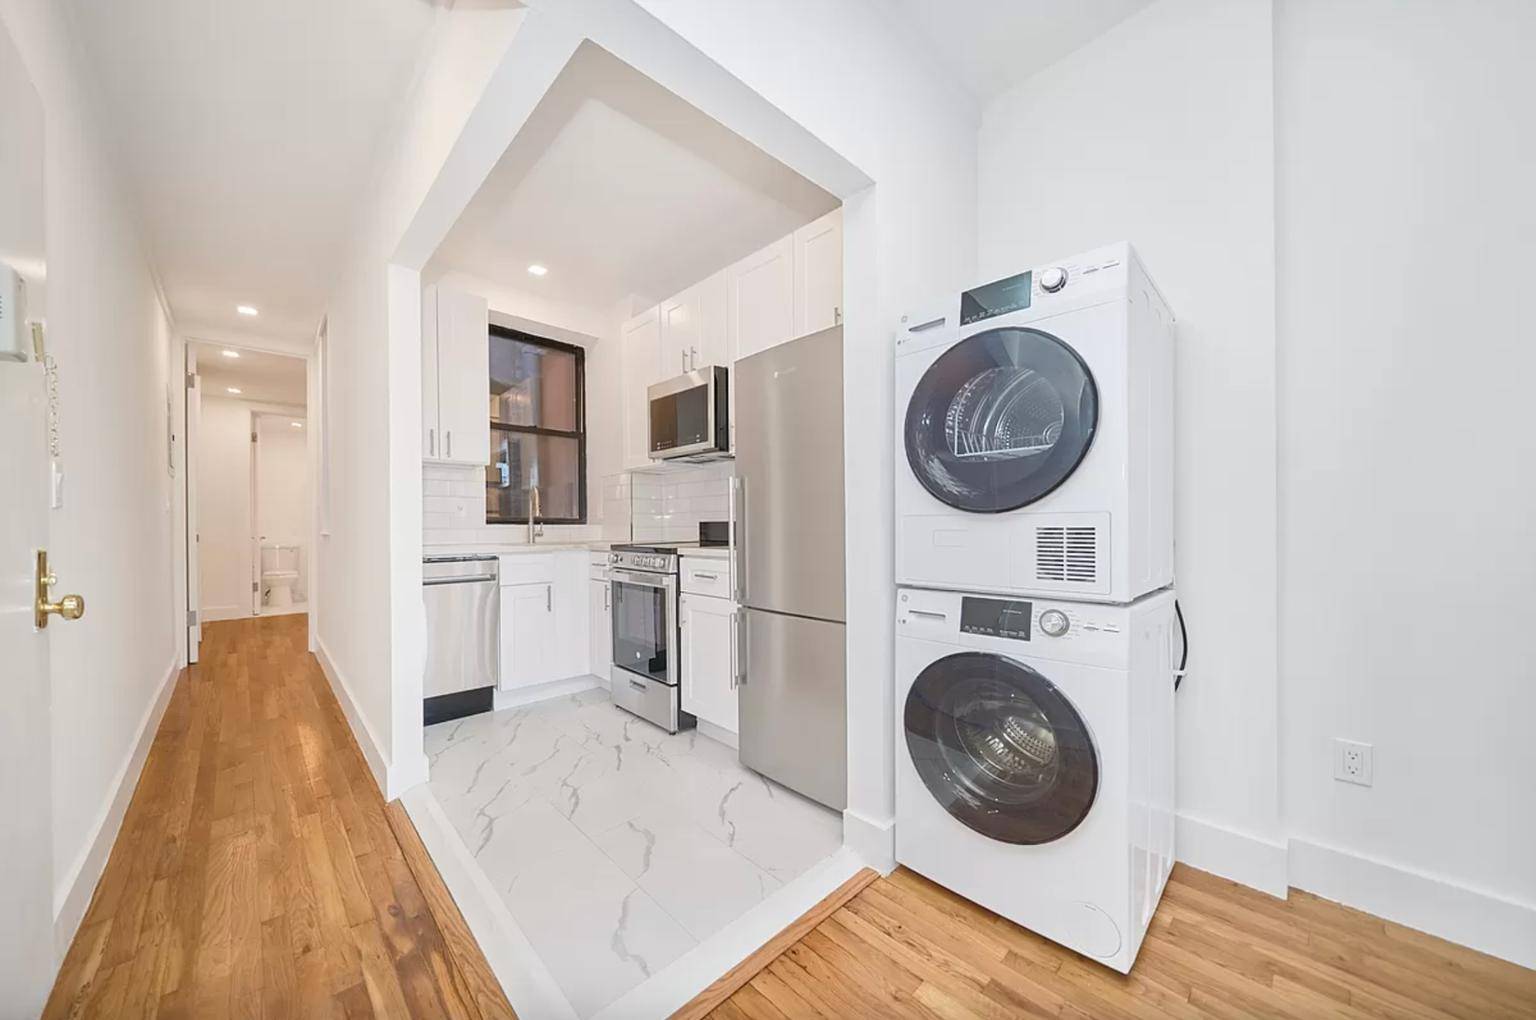 INQUIRE FOR VIDEO AVAILABLE JUNE 1 BRAND NEW RENOVATION Live in this newly gut renovated, never before lived in 1BR 1BA apartment in a brand new building with a water ...